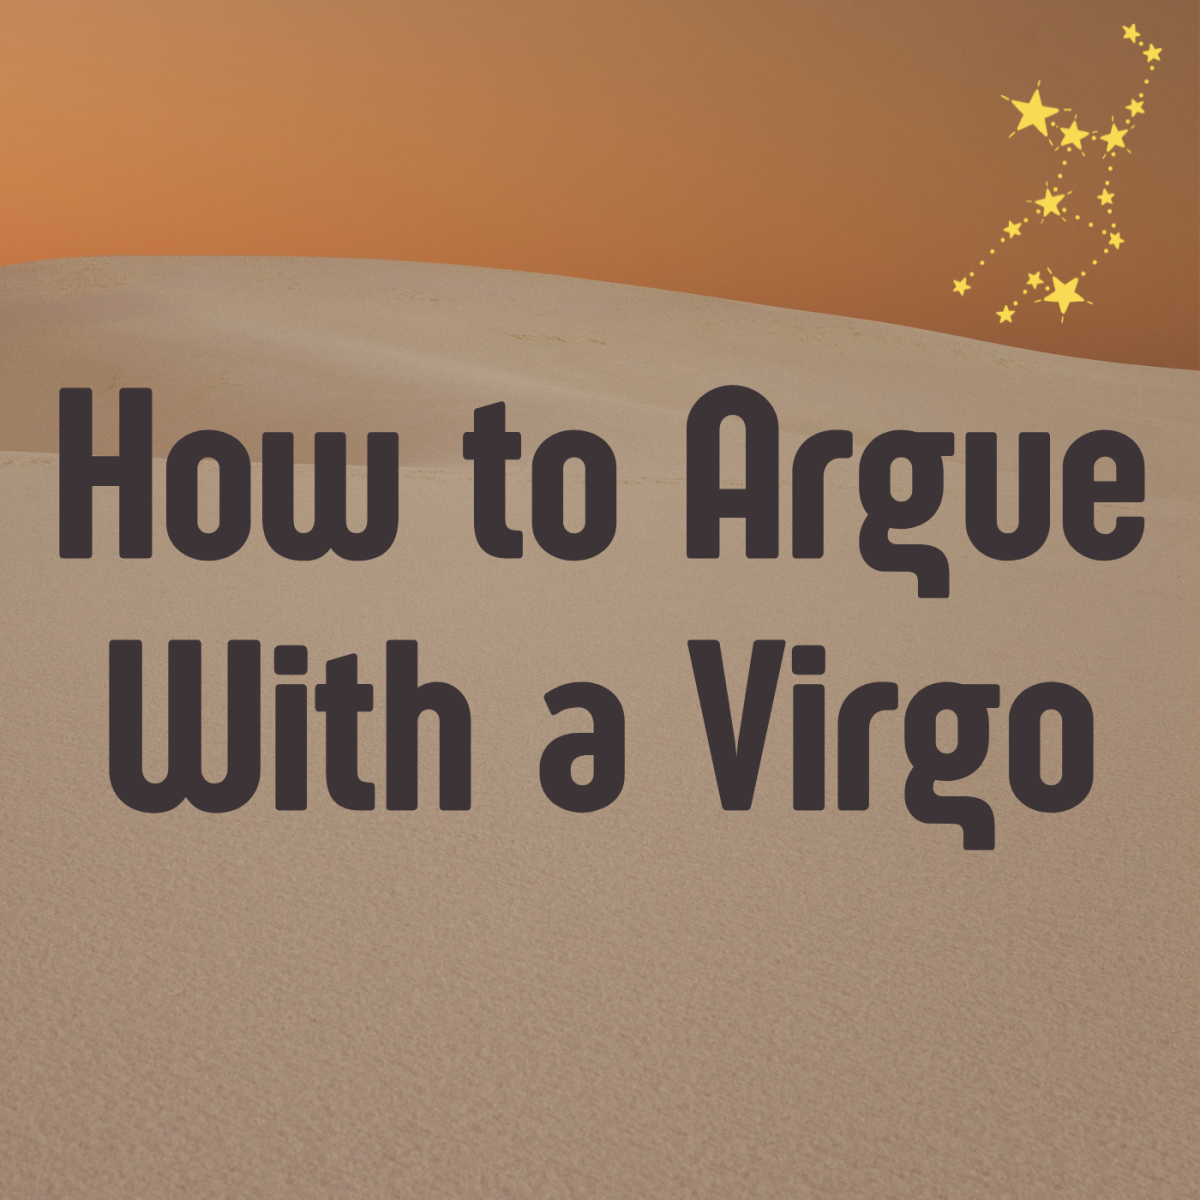 Get advice on arguing effectively and compassionately with your Virgo partner.